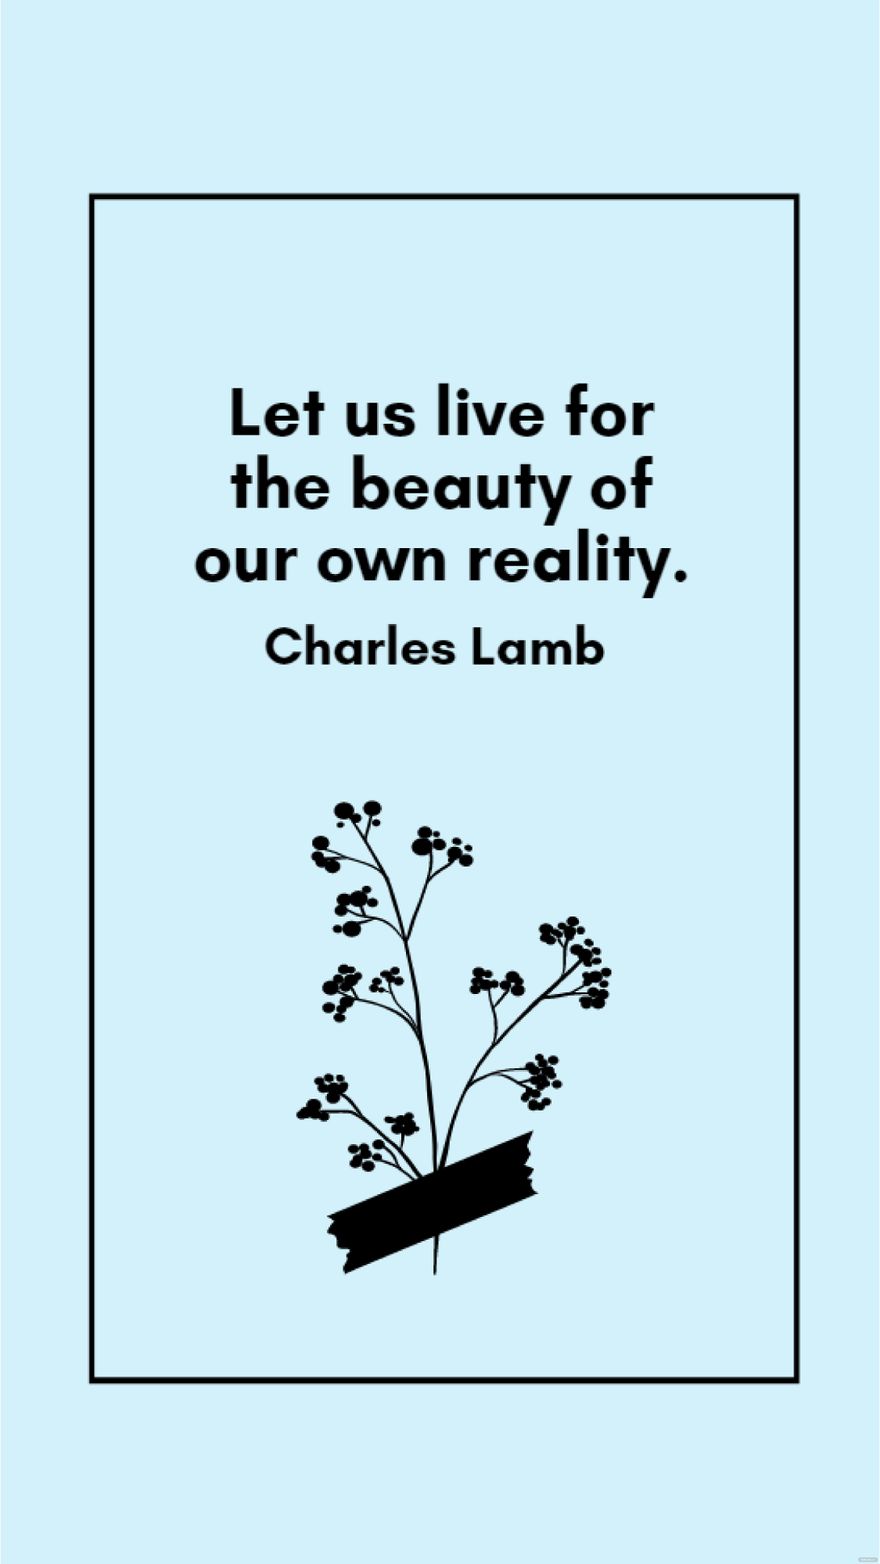 Free Charles Lamb - Let us live for the beauty of our own reality. in JPG